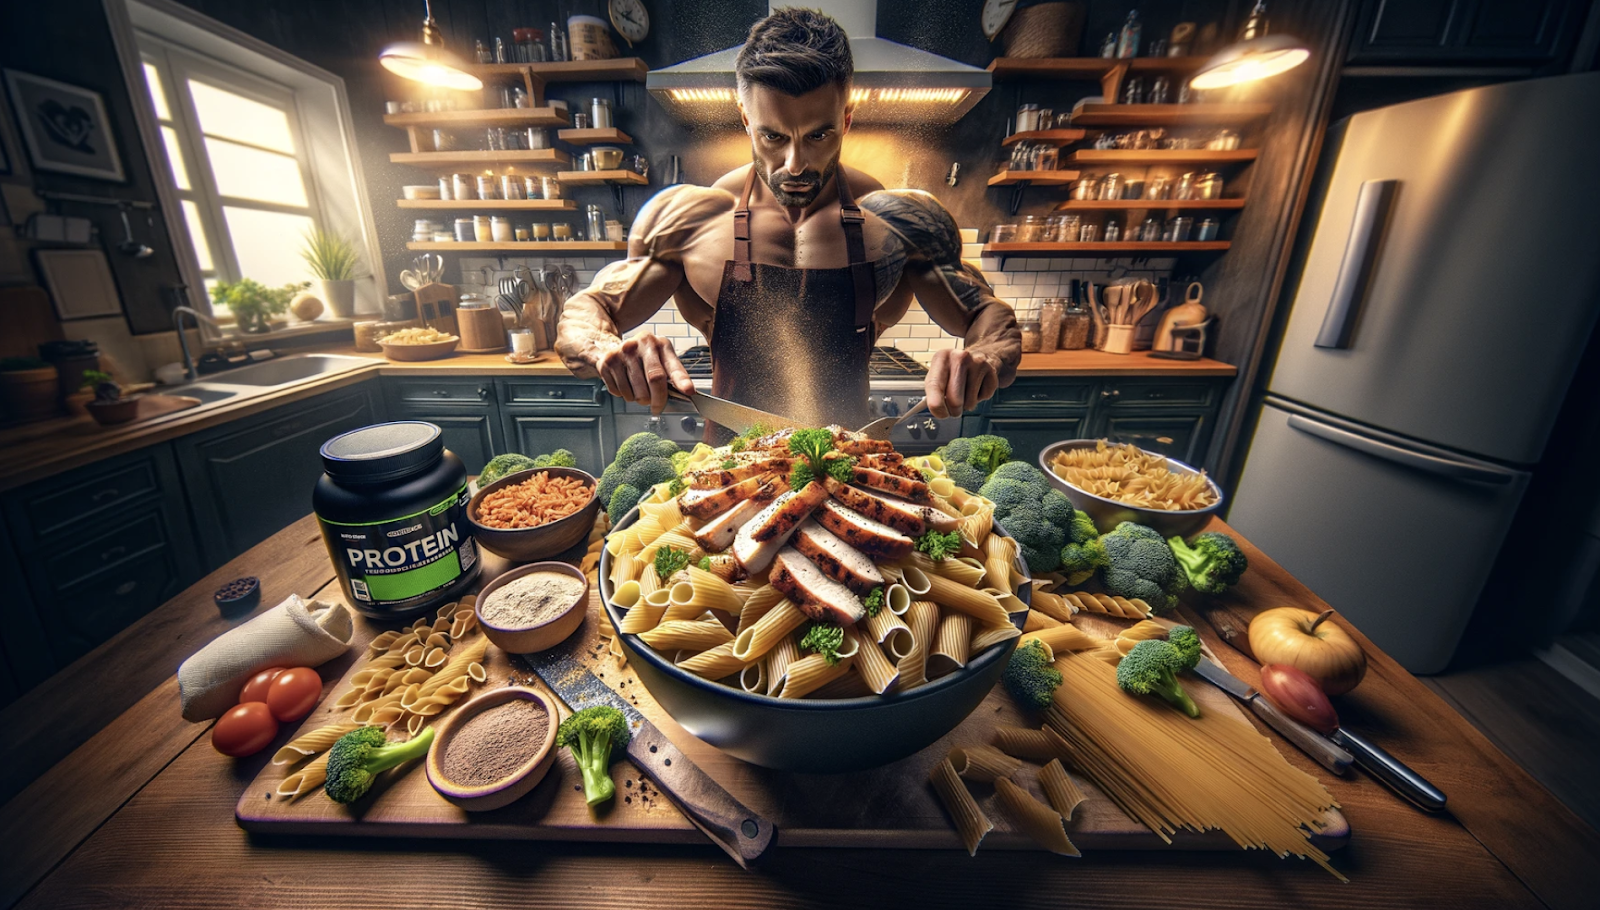 As a seasoned bodybuilder, I've learned that the key to success lies not only in intense training but also in fueling your body with the right nutrients.